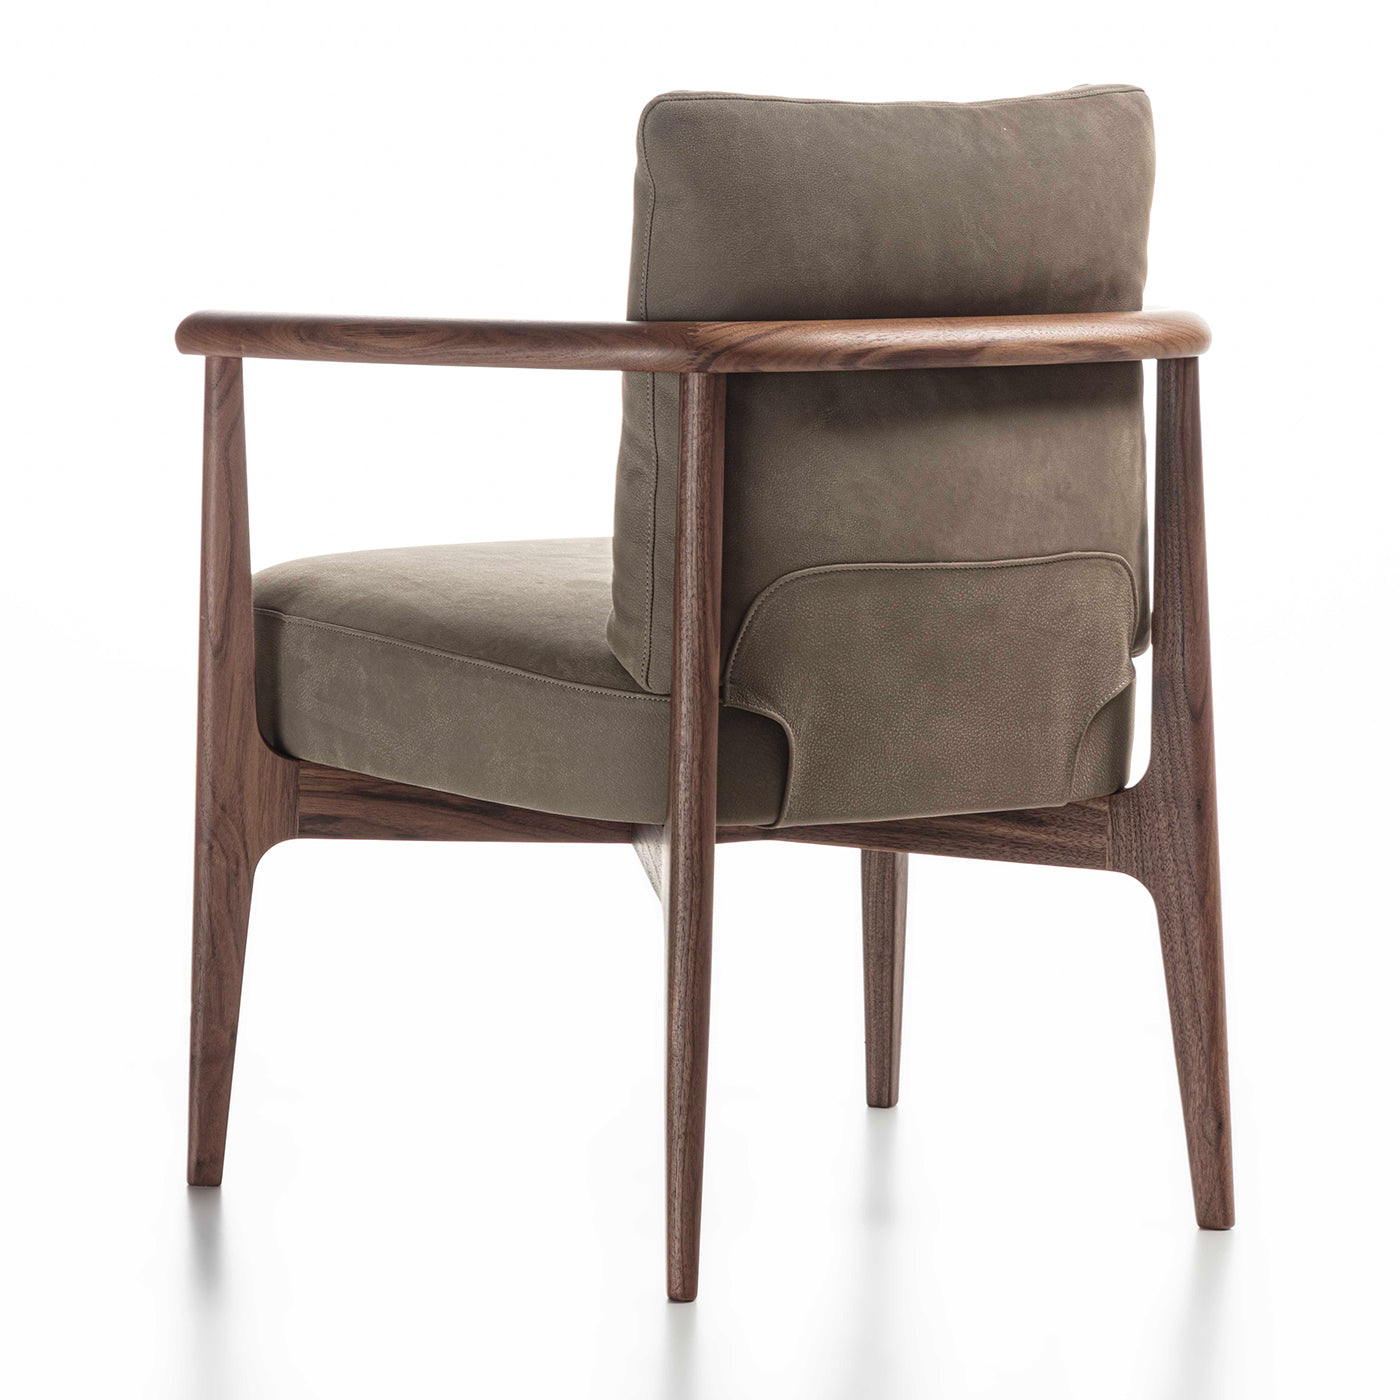 Greta Canaletto Walnut & Gray Leather Lounge Chair With Arms - Alternative view 2